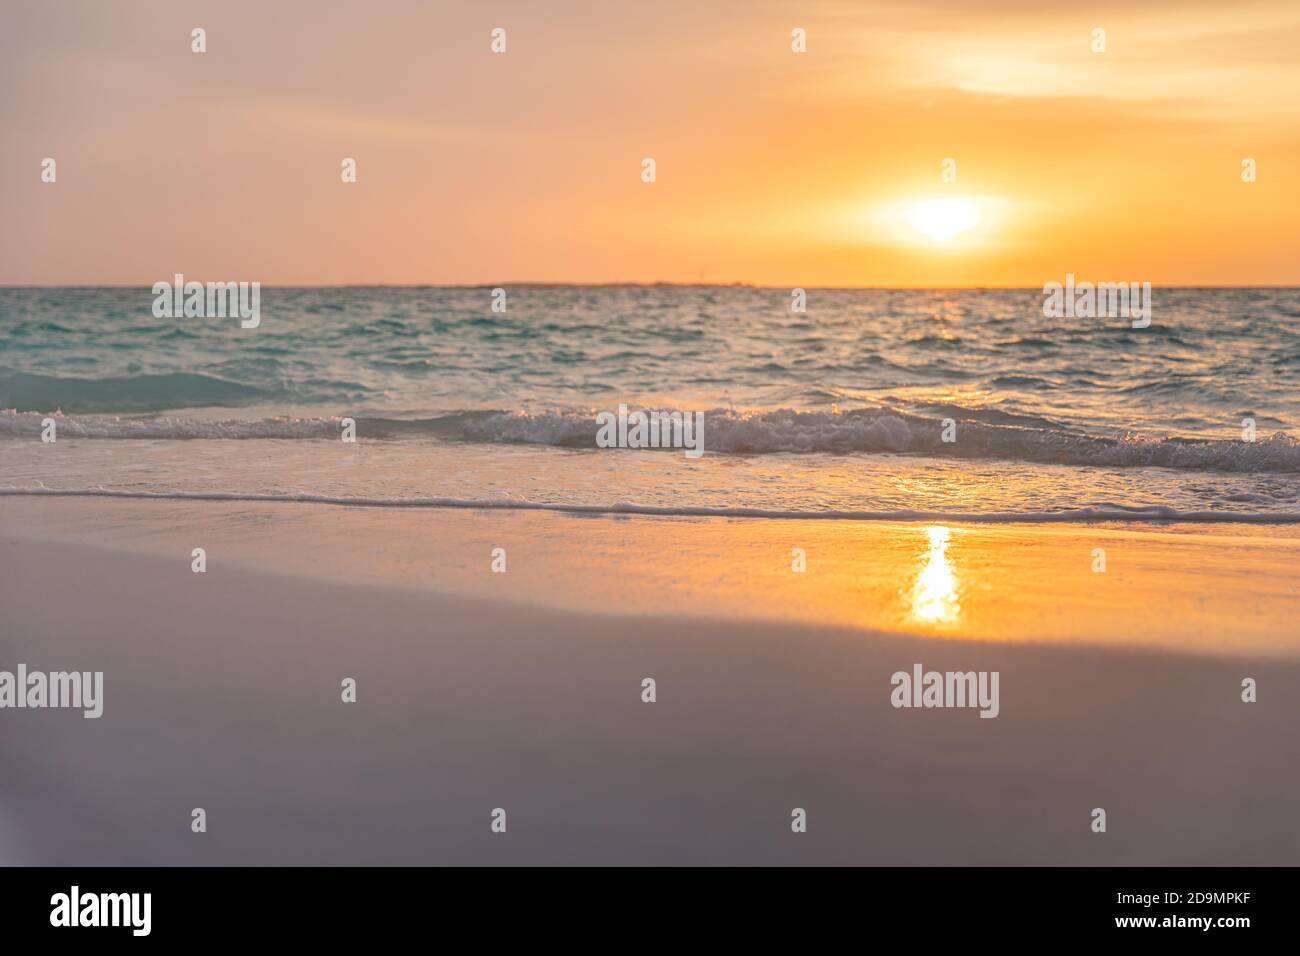 Soft sand, calm ocean waves in tropical sea coast, seaside under colorful cloudy sky. Amazing sunset beach landscape, zen paradise, tranquil island Stock Photo